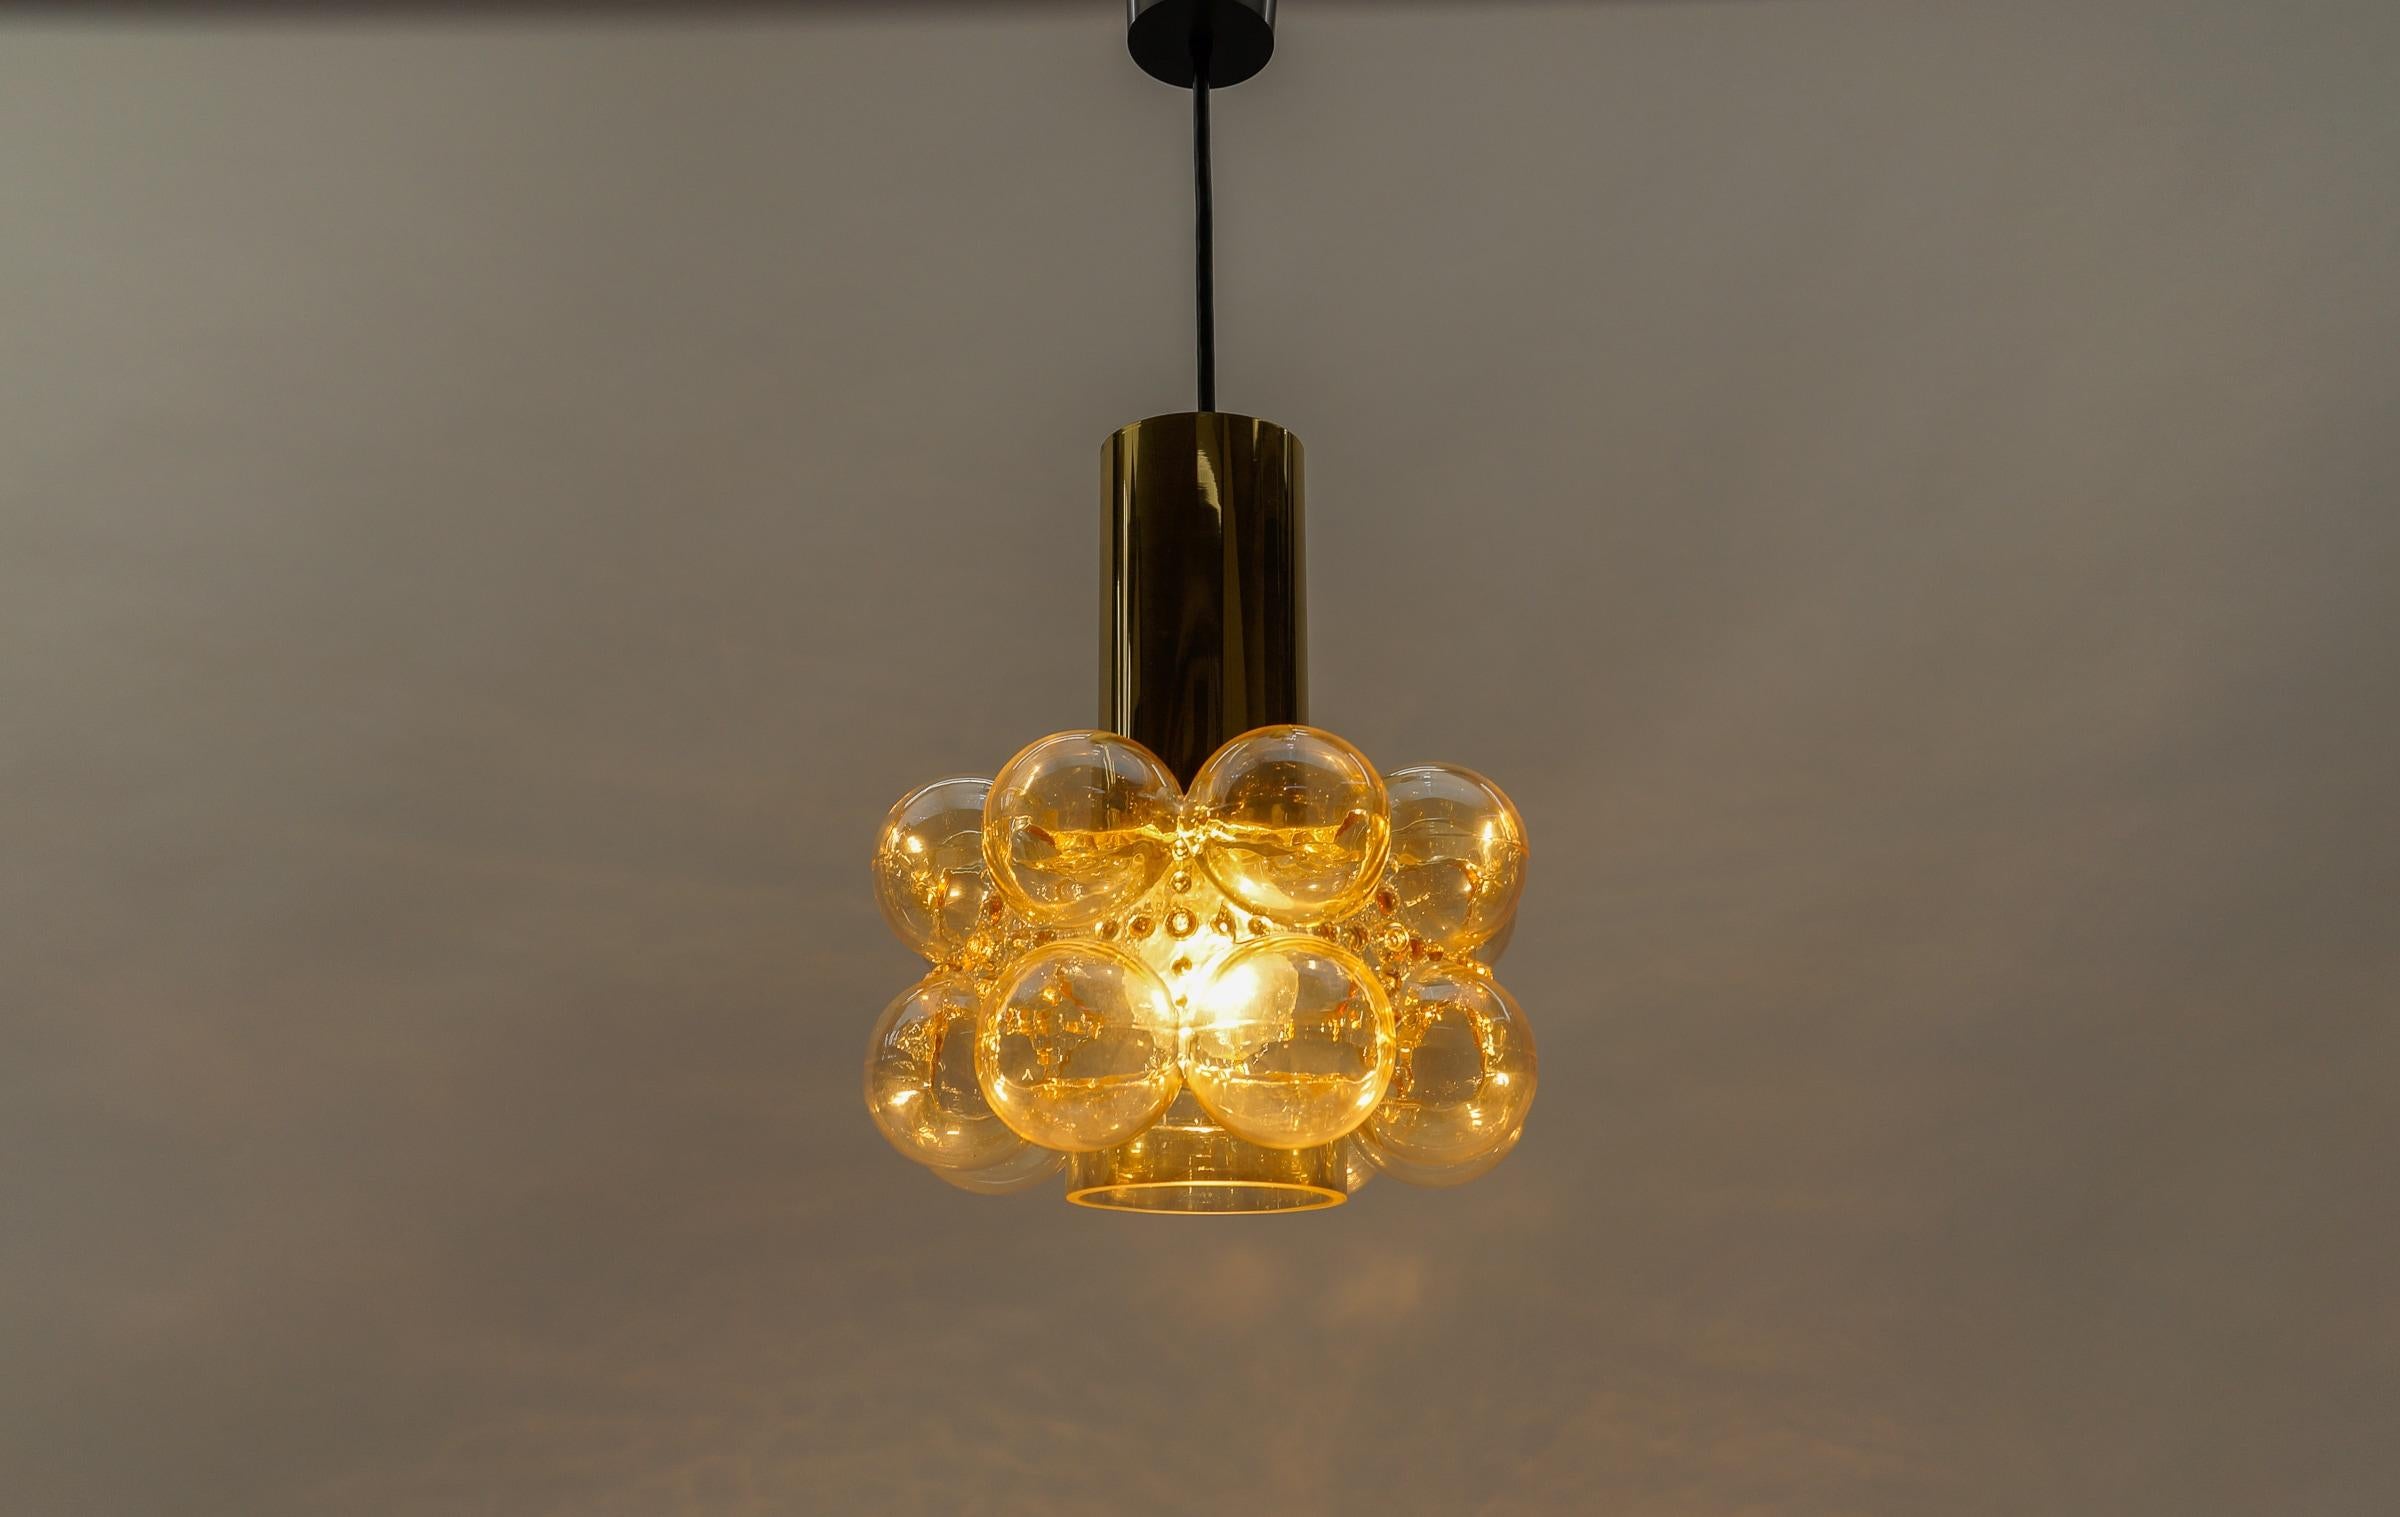 Amber Bubble Glass Ceiling Lamp by Helena Tynell for Limburg, Germany 1960s

Dimensions
Height: 23.62 in. (50 cm)
Diameter: 9.44 in. (25 cm)

The fixture need 1 x E27 standard bulb with 60W max.

Light bulbs are not included. 
It is possible to